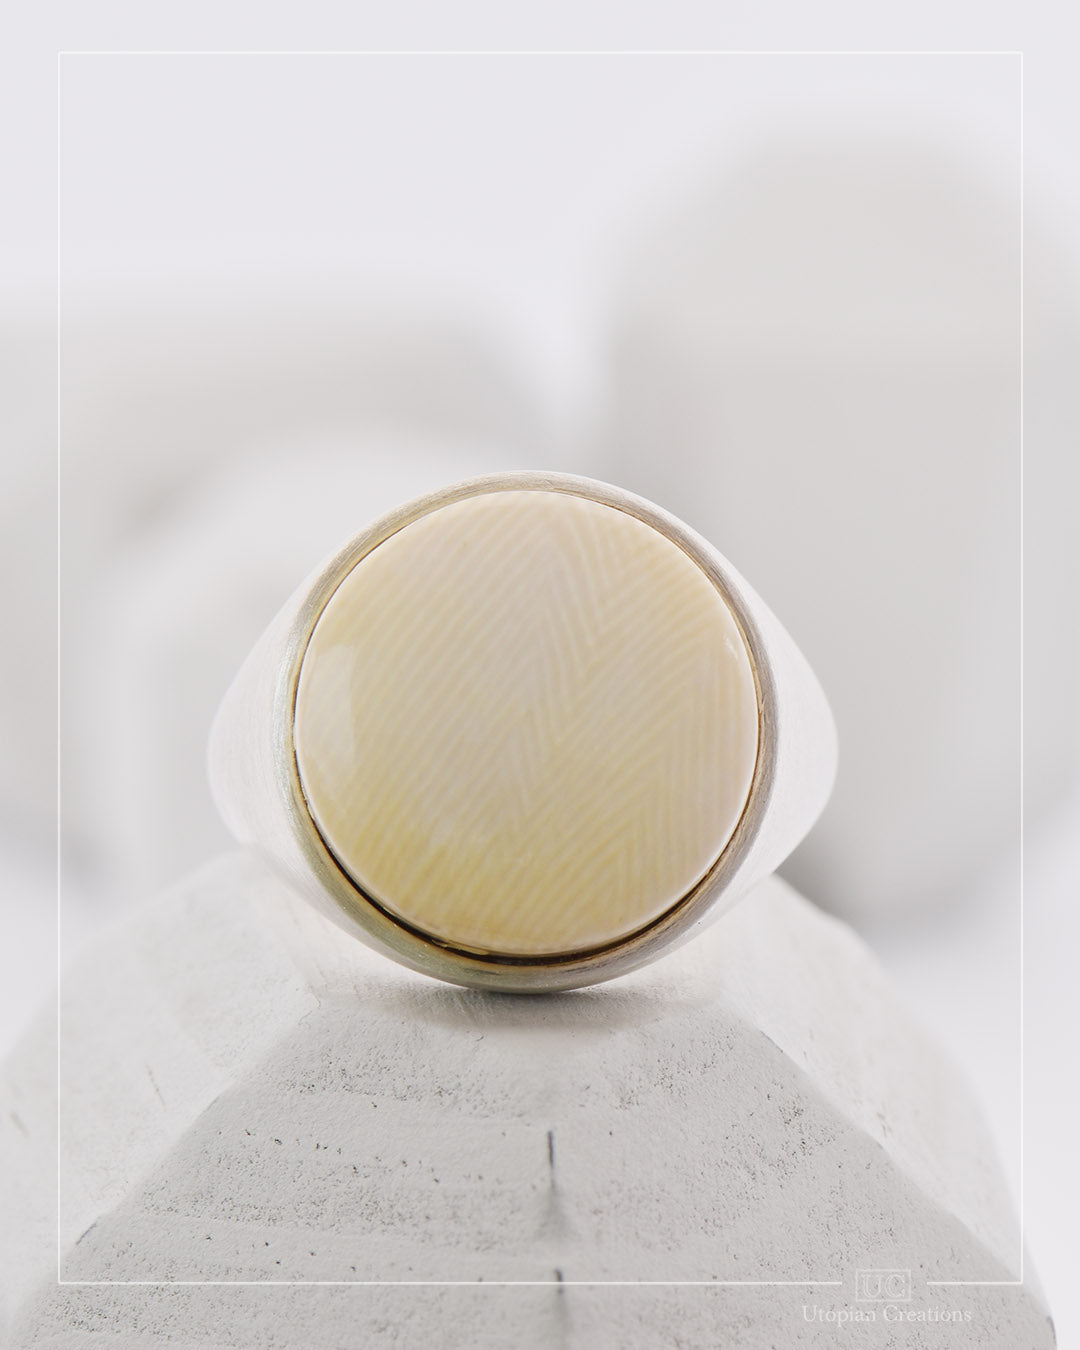 Woolly Mammoth Tusk Signet Ring - Ready To Wear